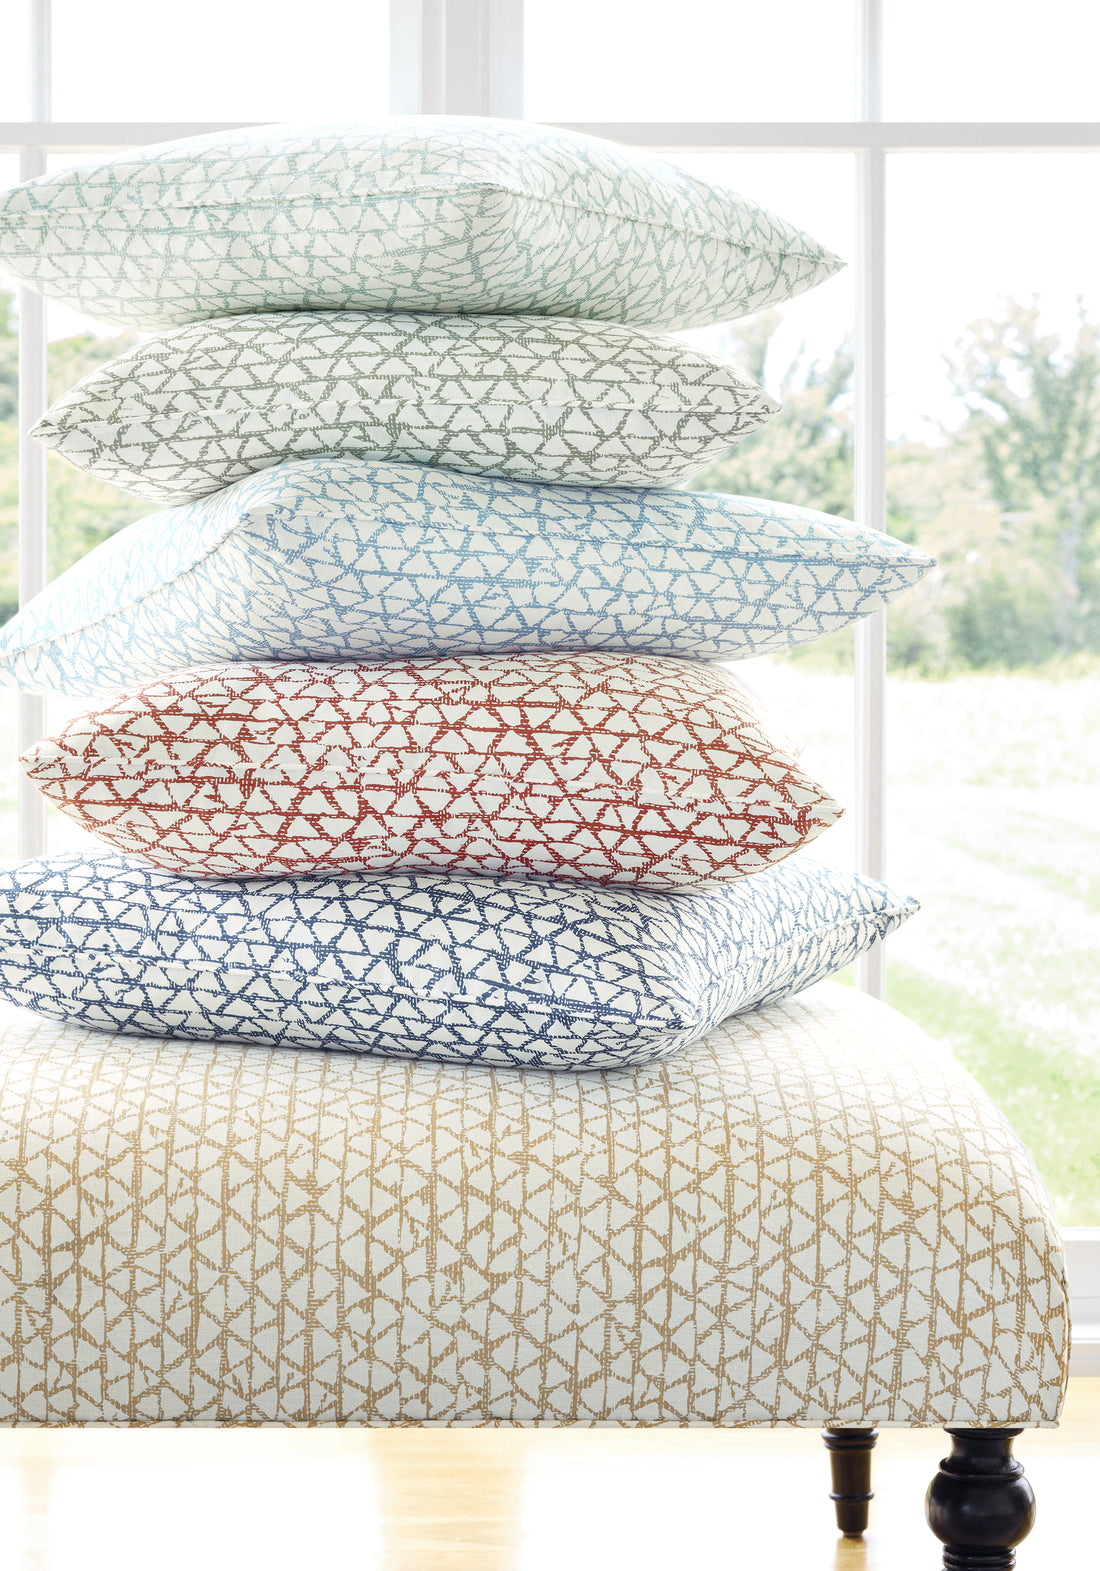 Pillows featuring Maluku fabric in seaglass color - pattern number F981329 - by Thibaut in the Montecito collection